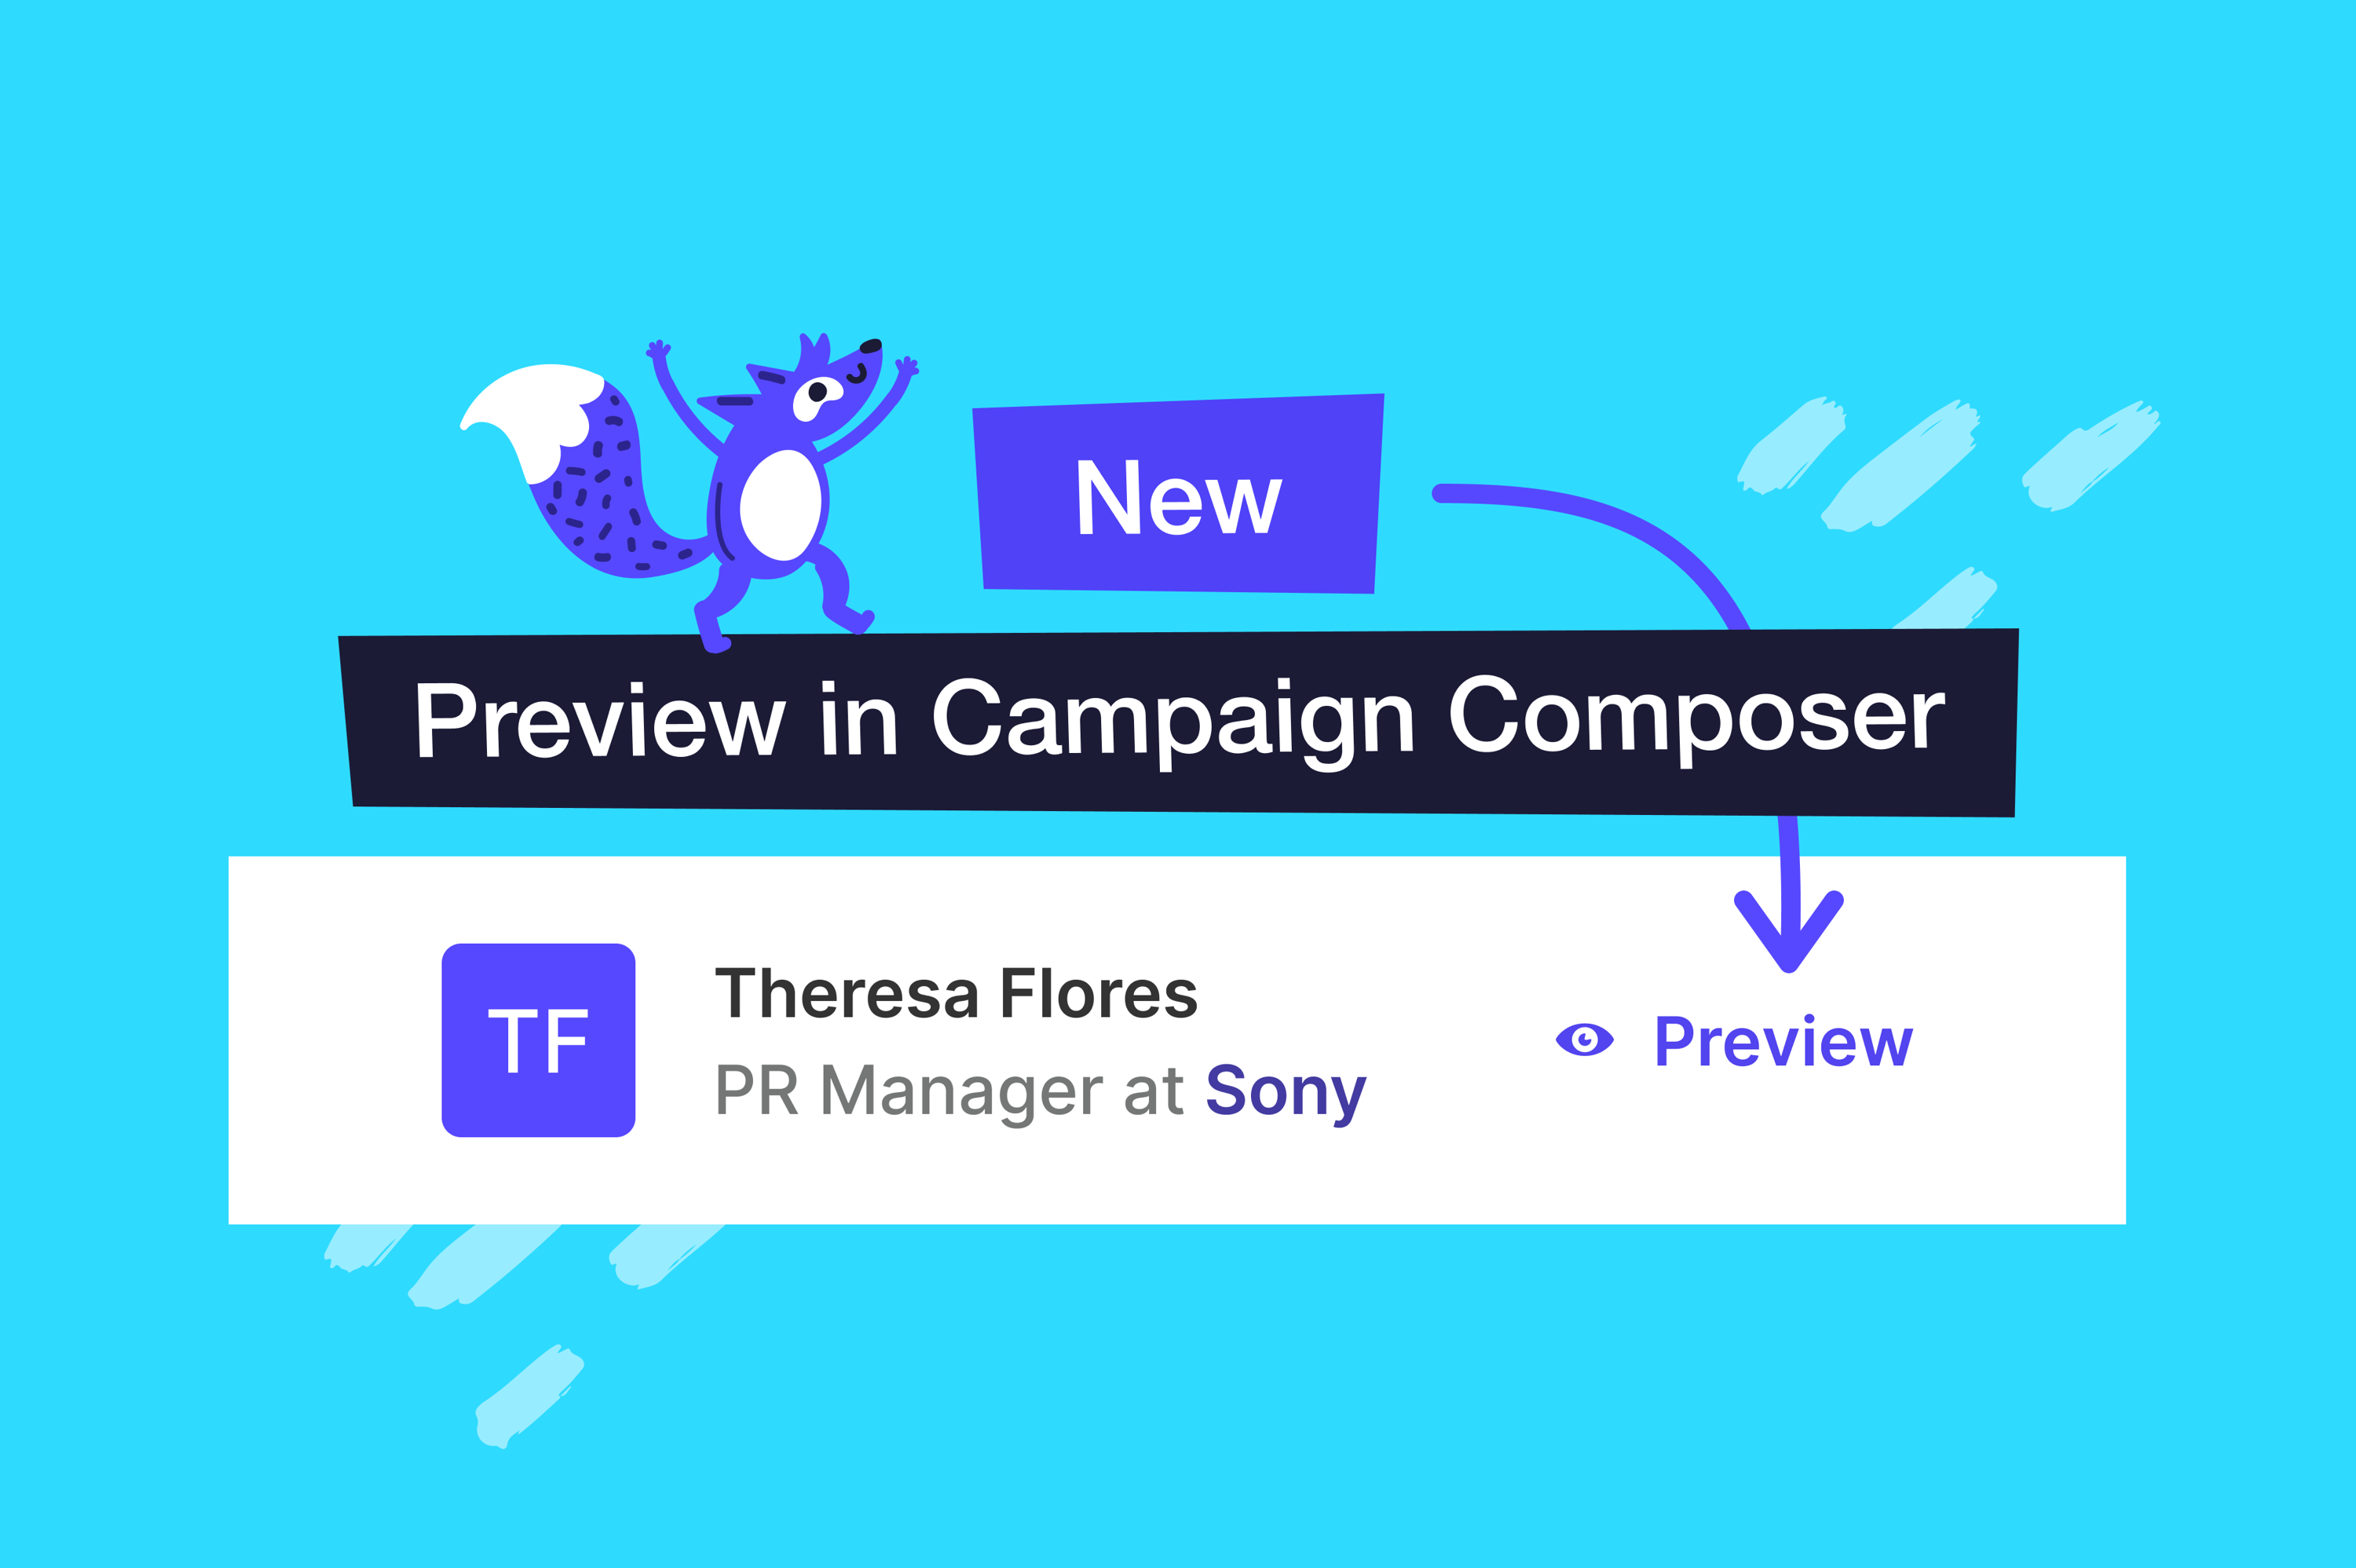 New features added to 'Step 3: Reviewing Recipients' of the Campaign Composer